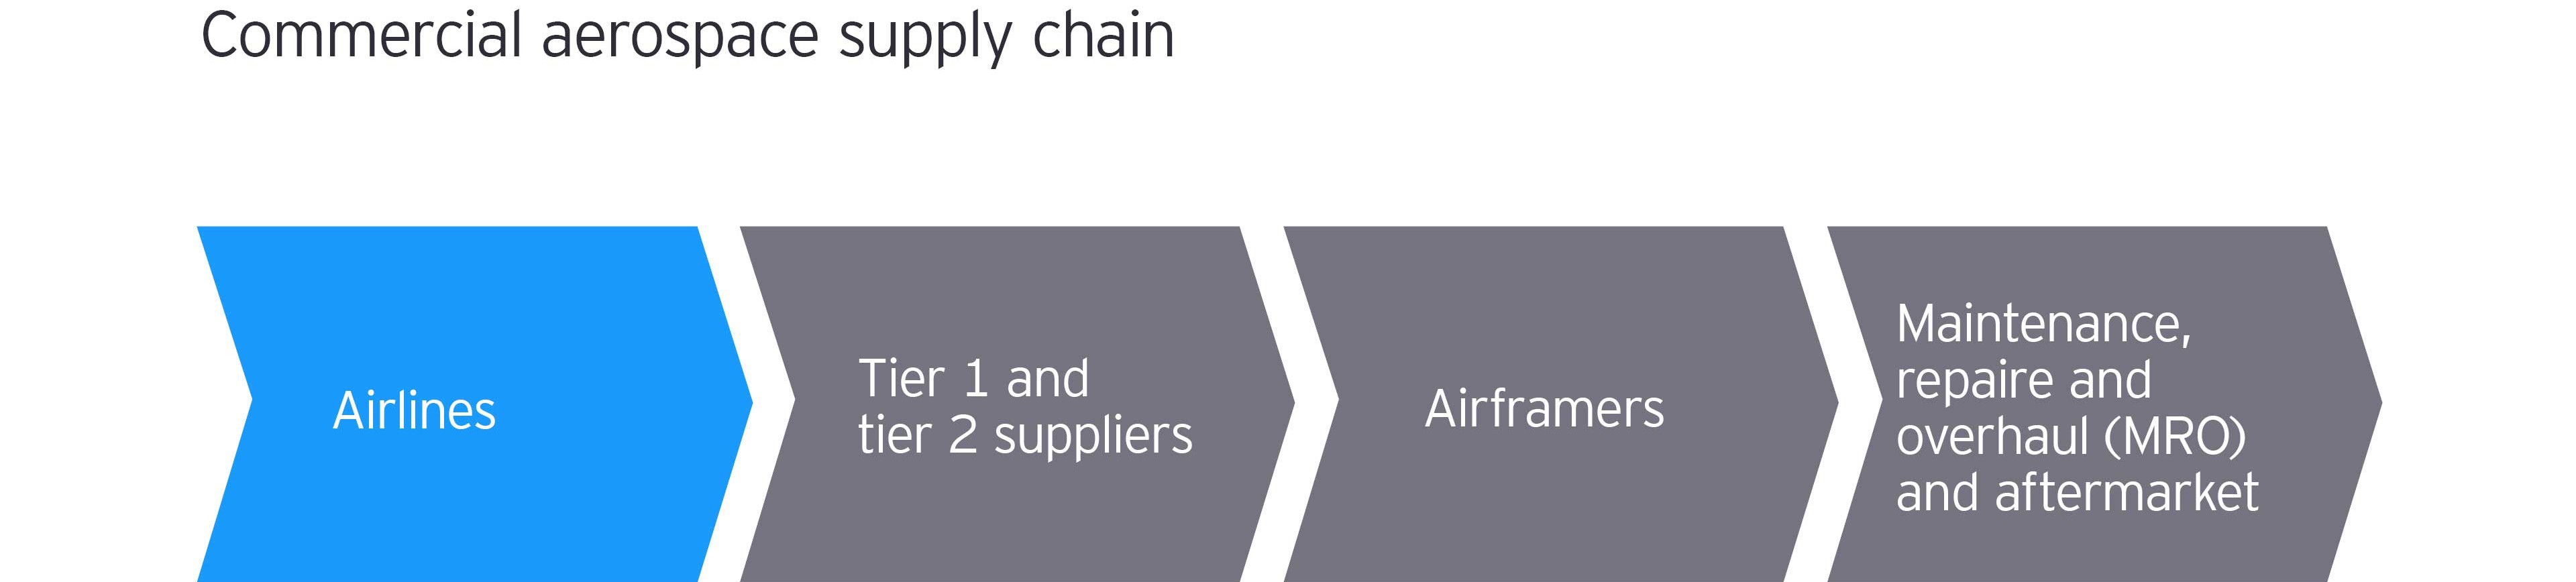 Commercial aerospace supply chain 